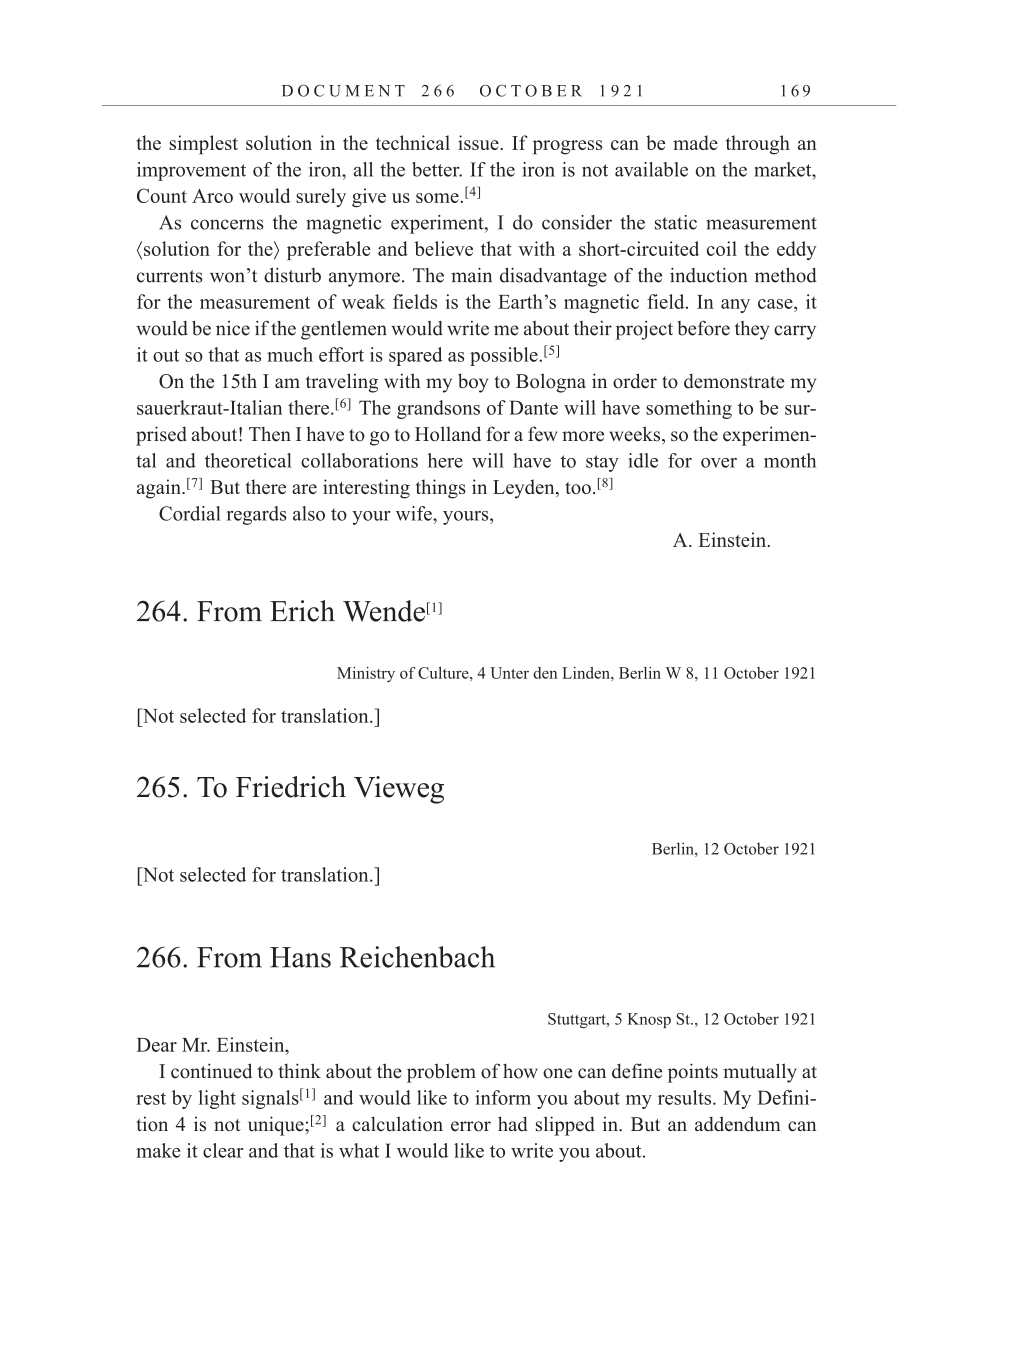 Volume 12: The Berlin Years: Correspondence, January-December 1921 (English translation supplement) page 169